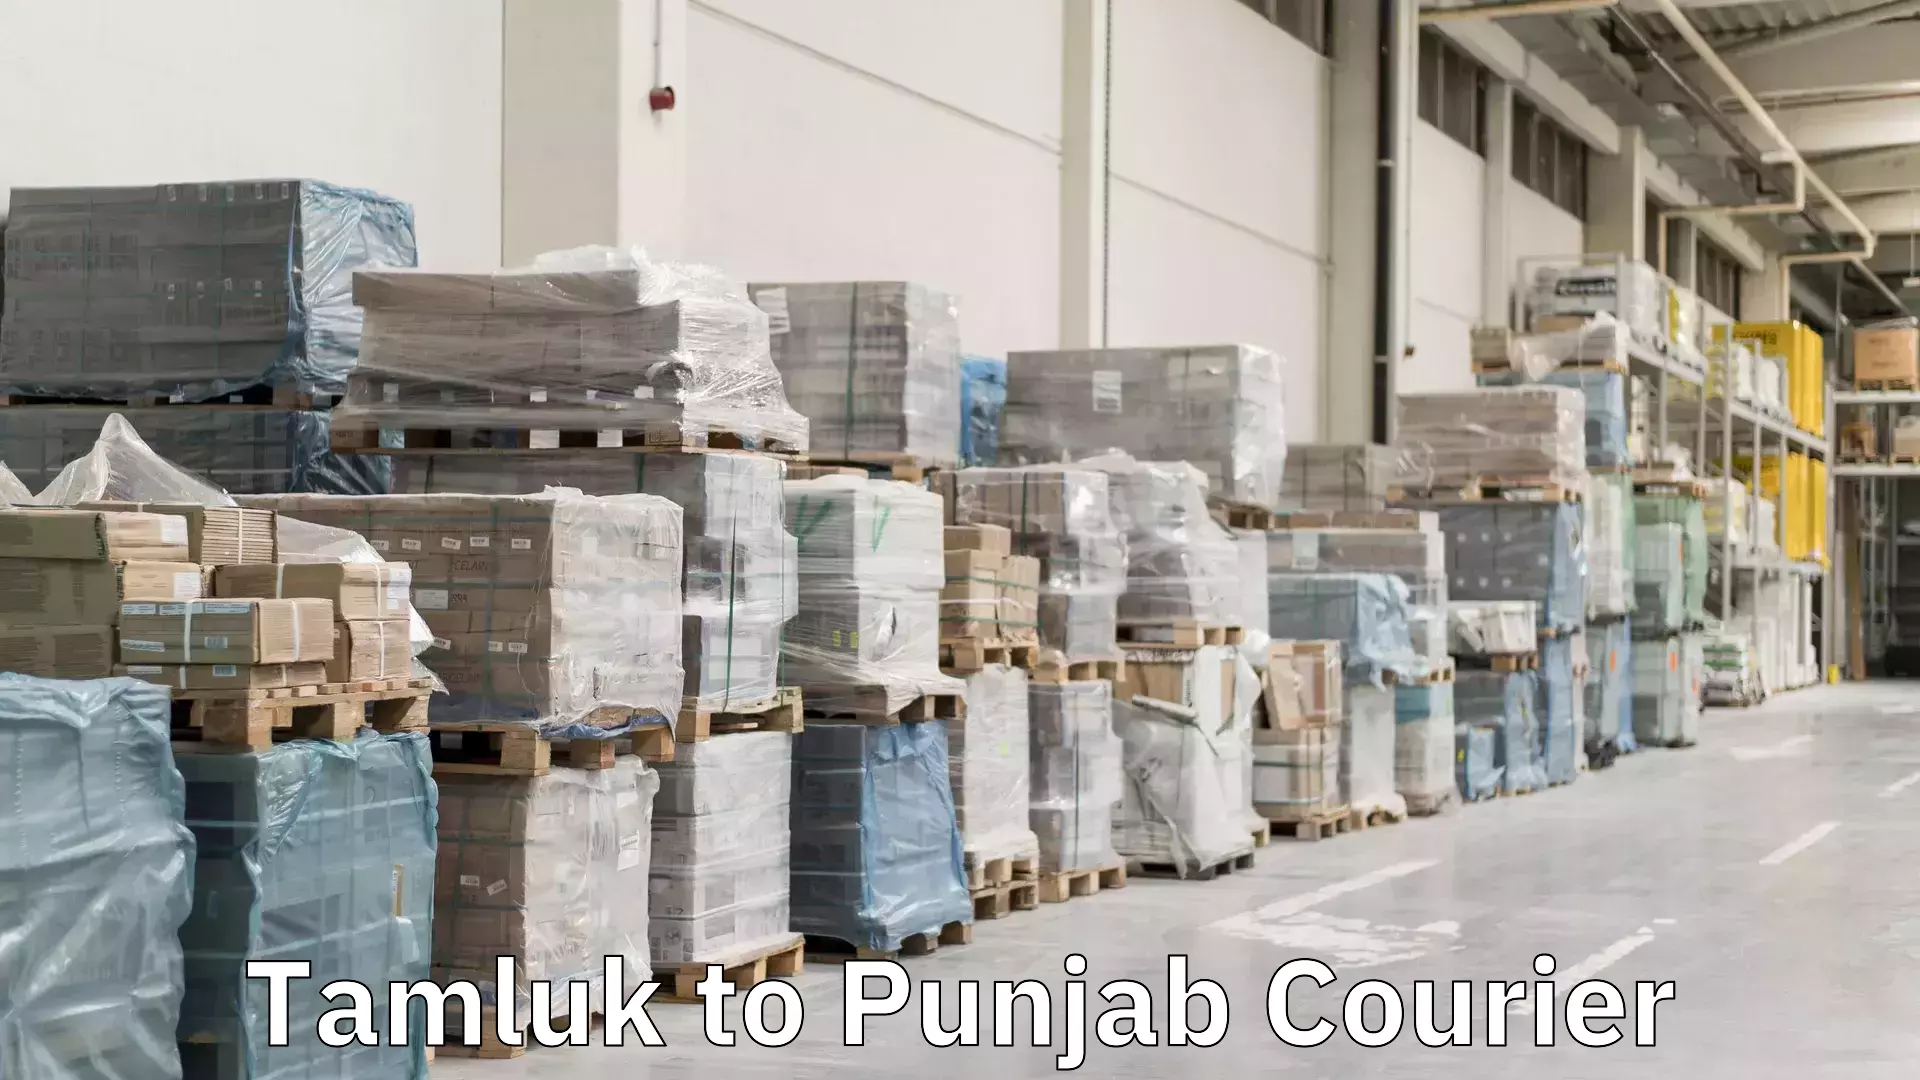 State-of-the-art courier technology Tamluk to Punjab